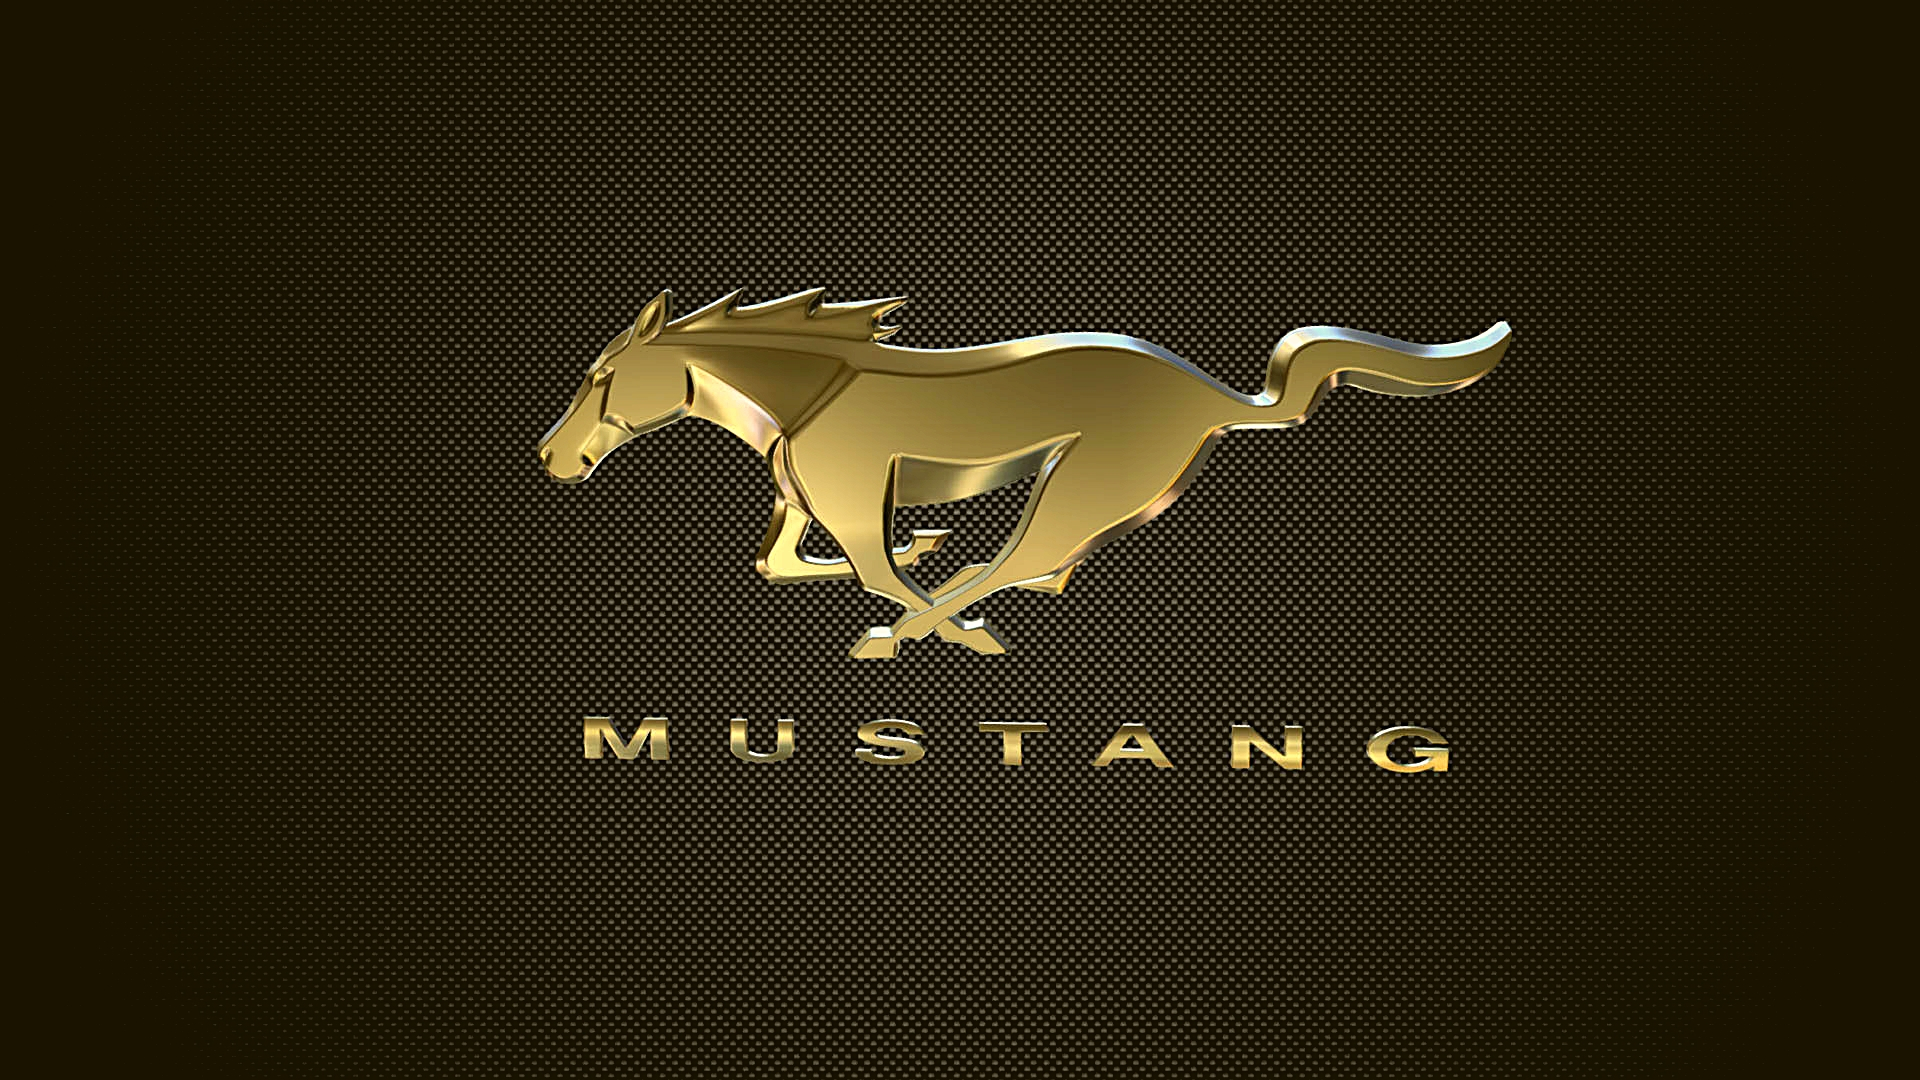 Pin by Abby on Wallpapers | Ford mustang wallpaper, Mustang wallpaper,  Mustang cars